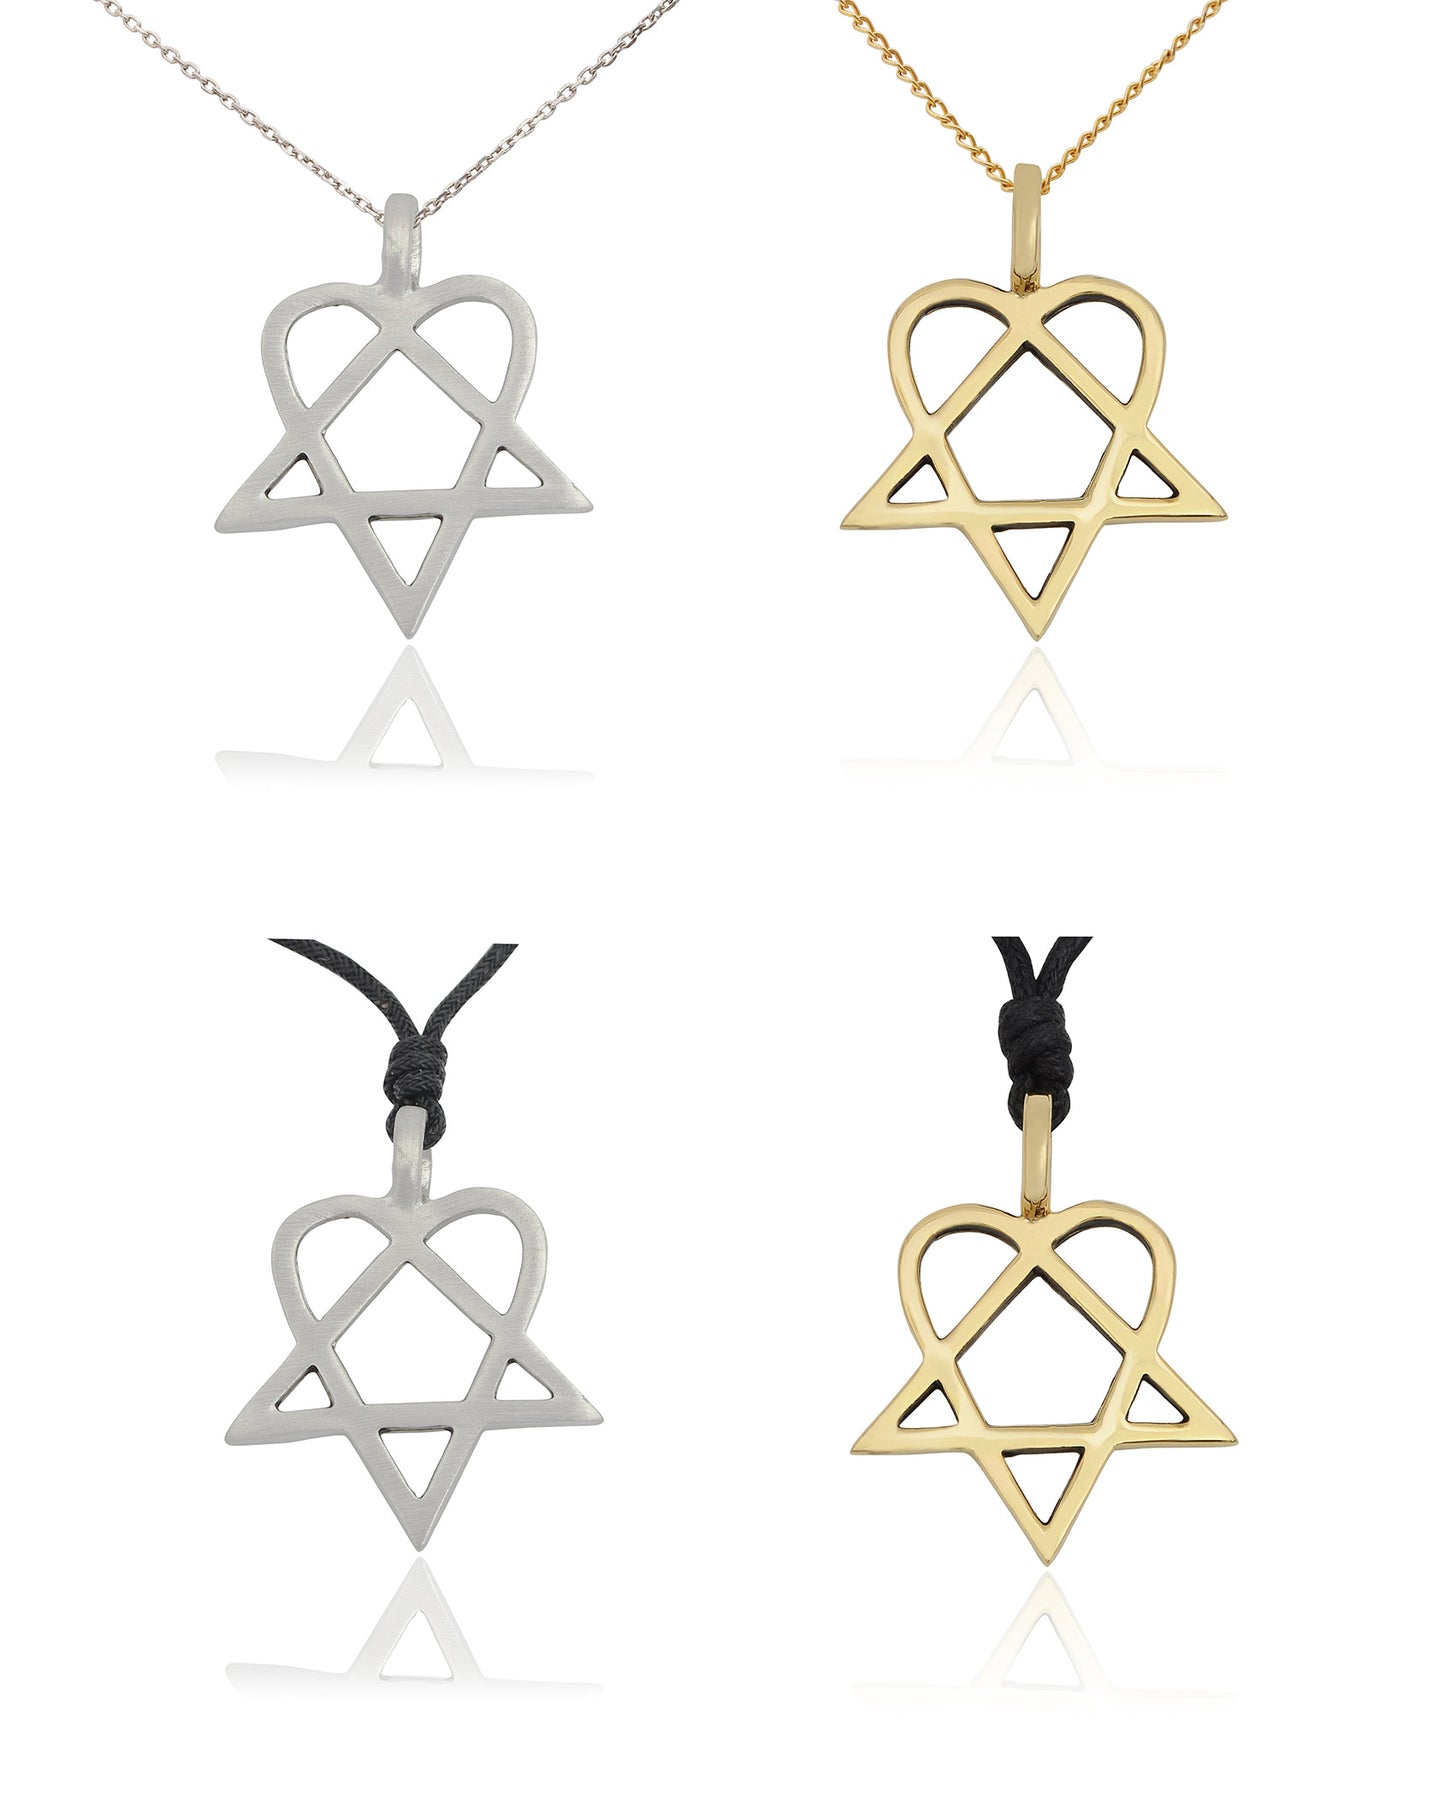 HIM Heartagram Silver Pewter Gold Brass Necklace Pendant Jewelry